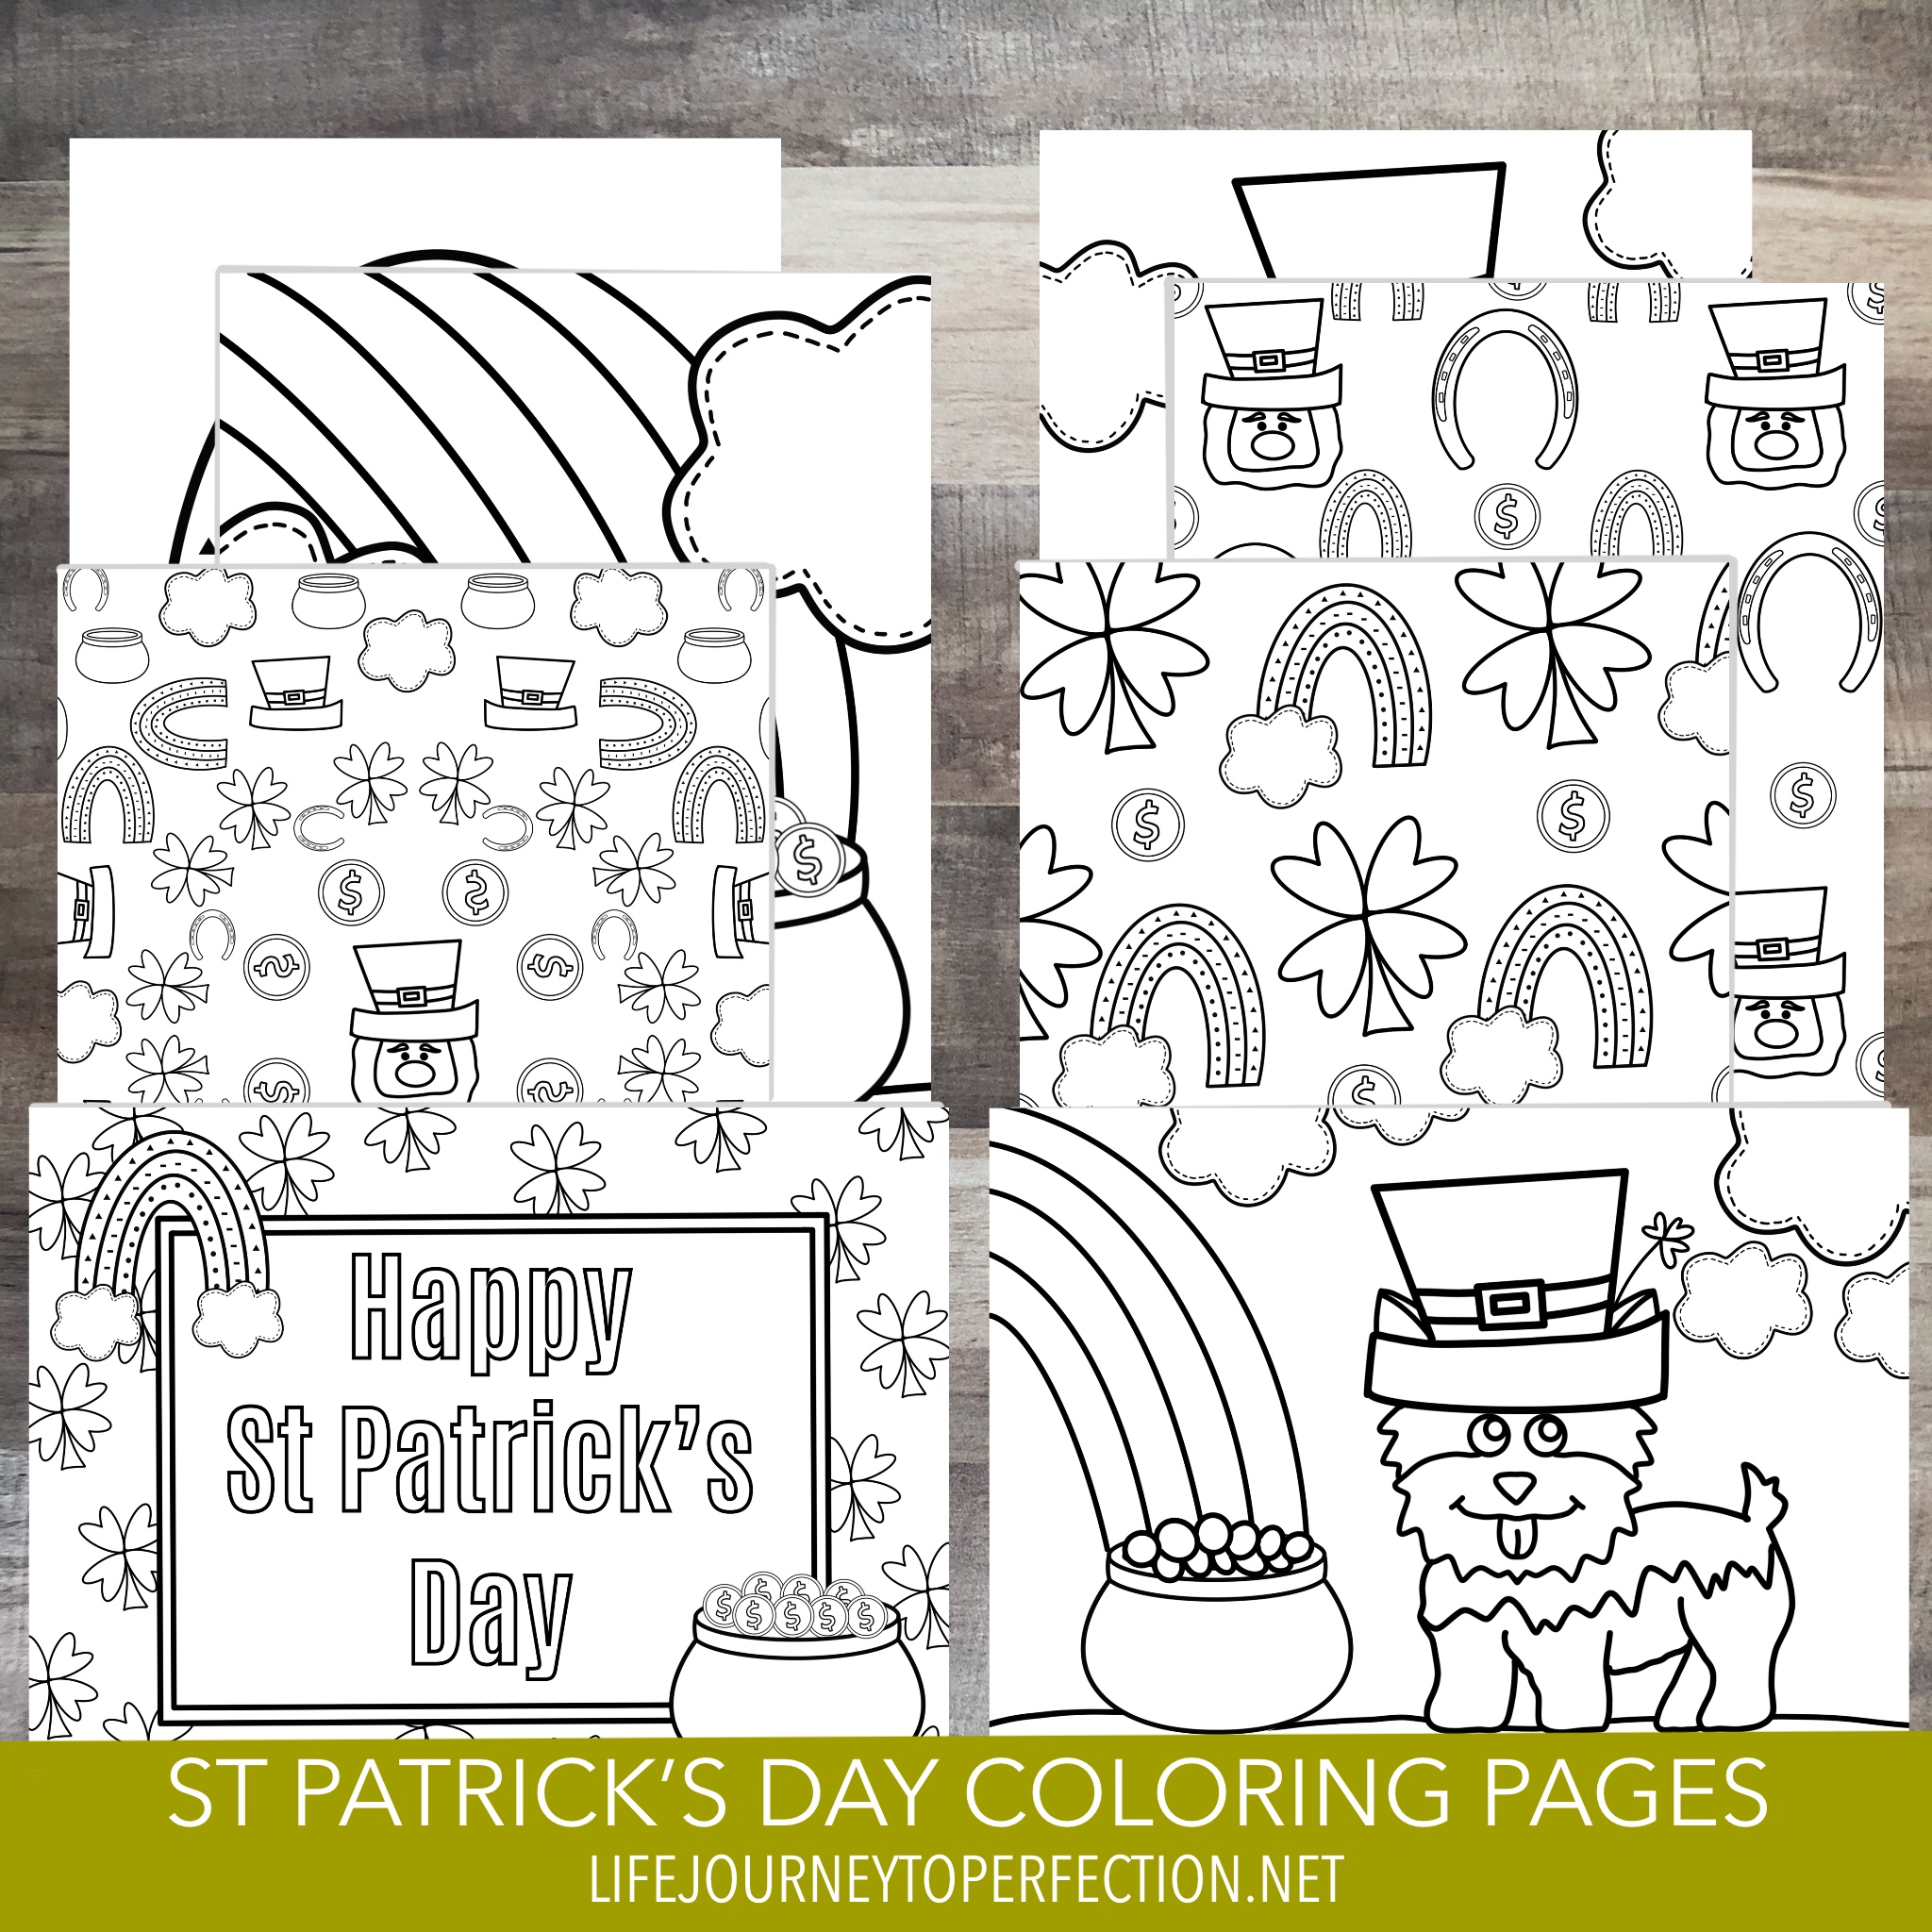 Life's Journey To Perfection Super Fun St. Patrick's Day Coloring Pages